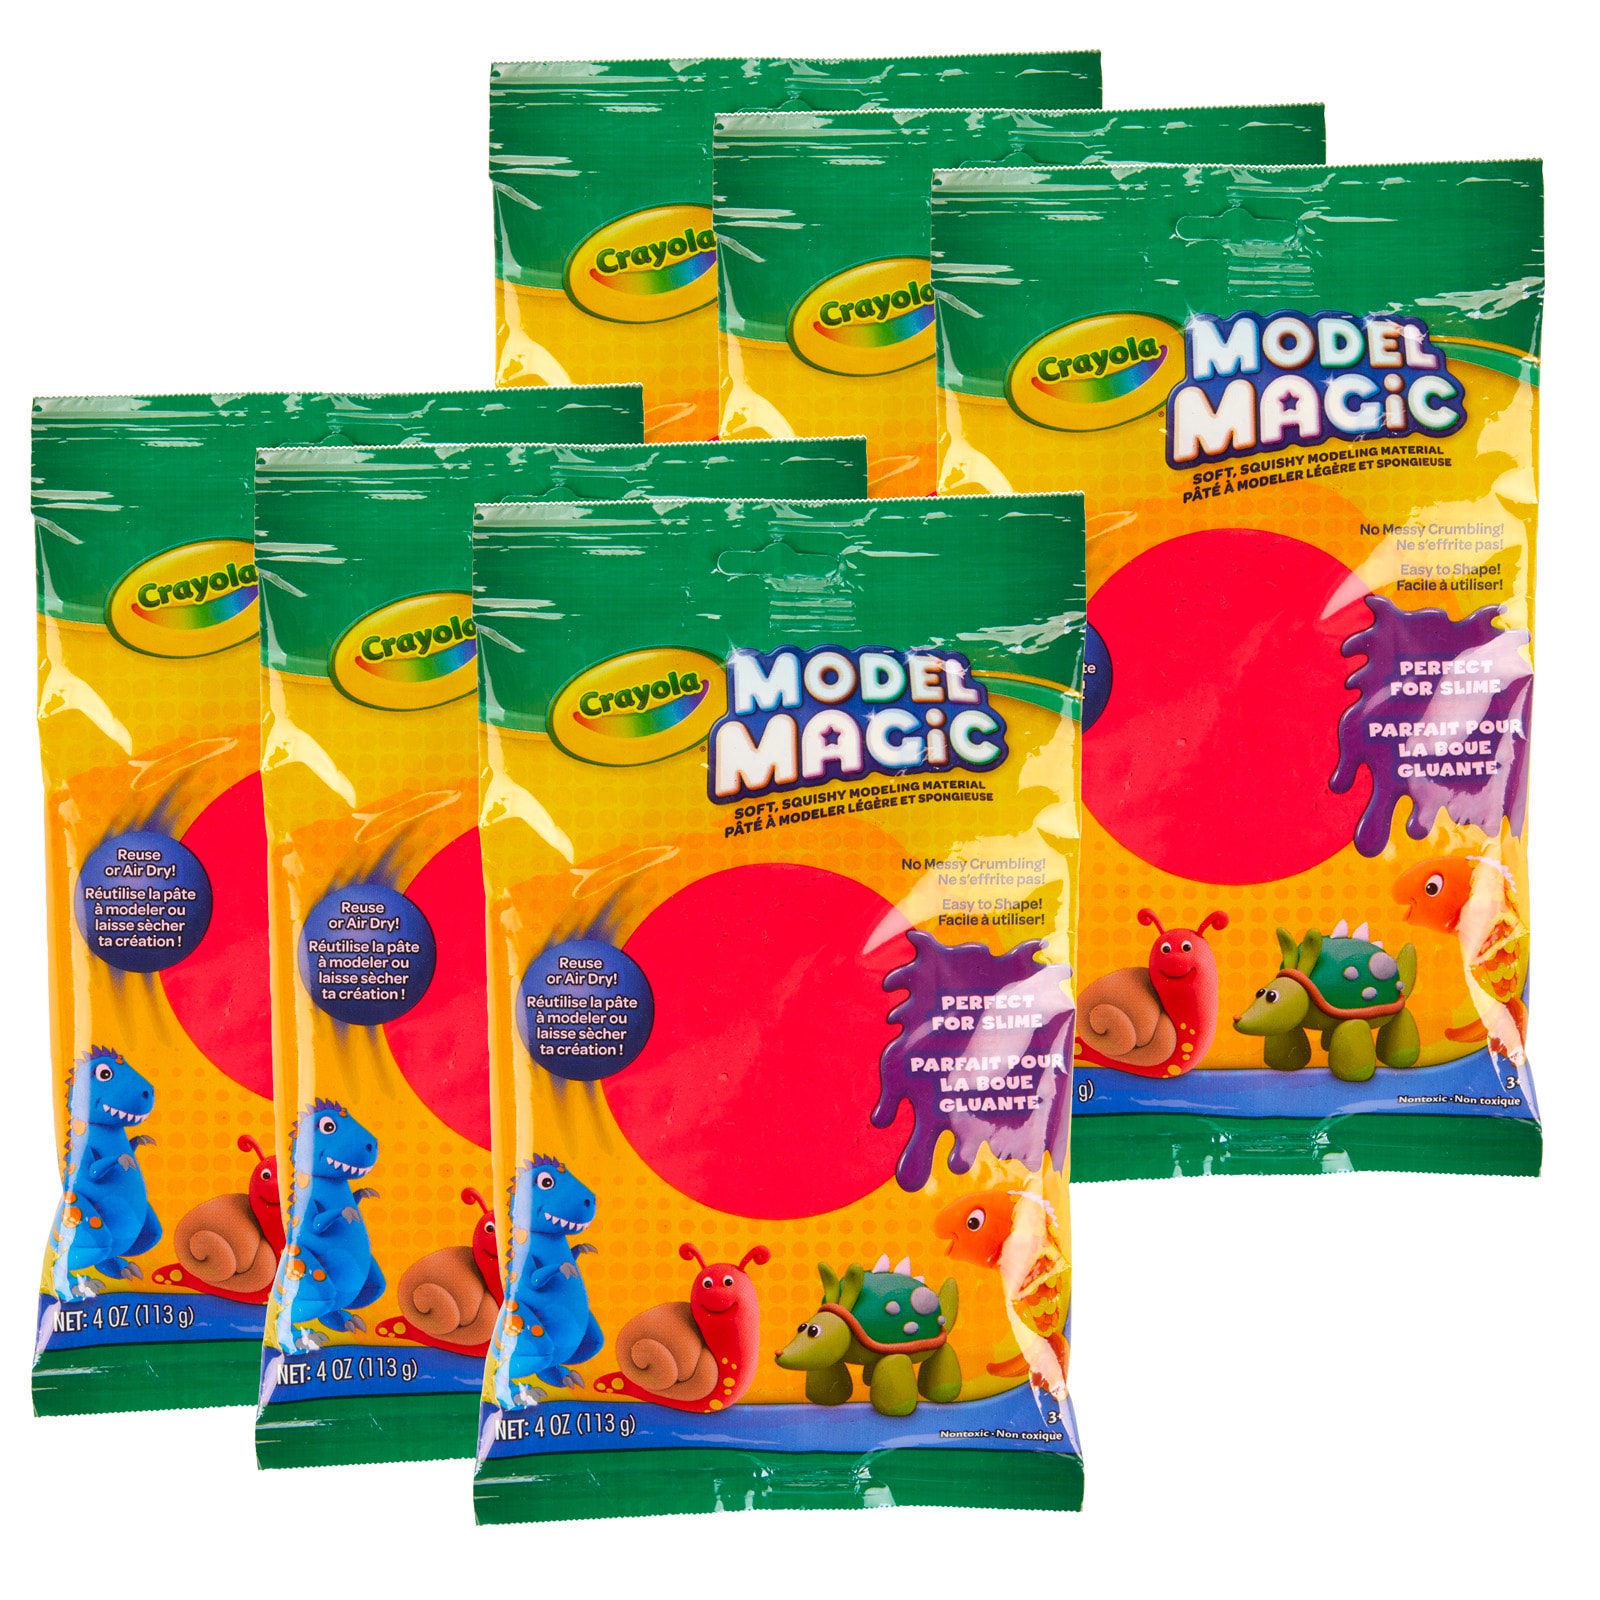 Crayola Model Magic Modeling Compound, Red, 4-oz Packs, 6 Packs at